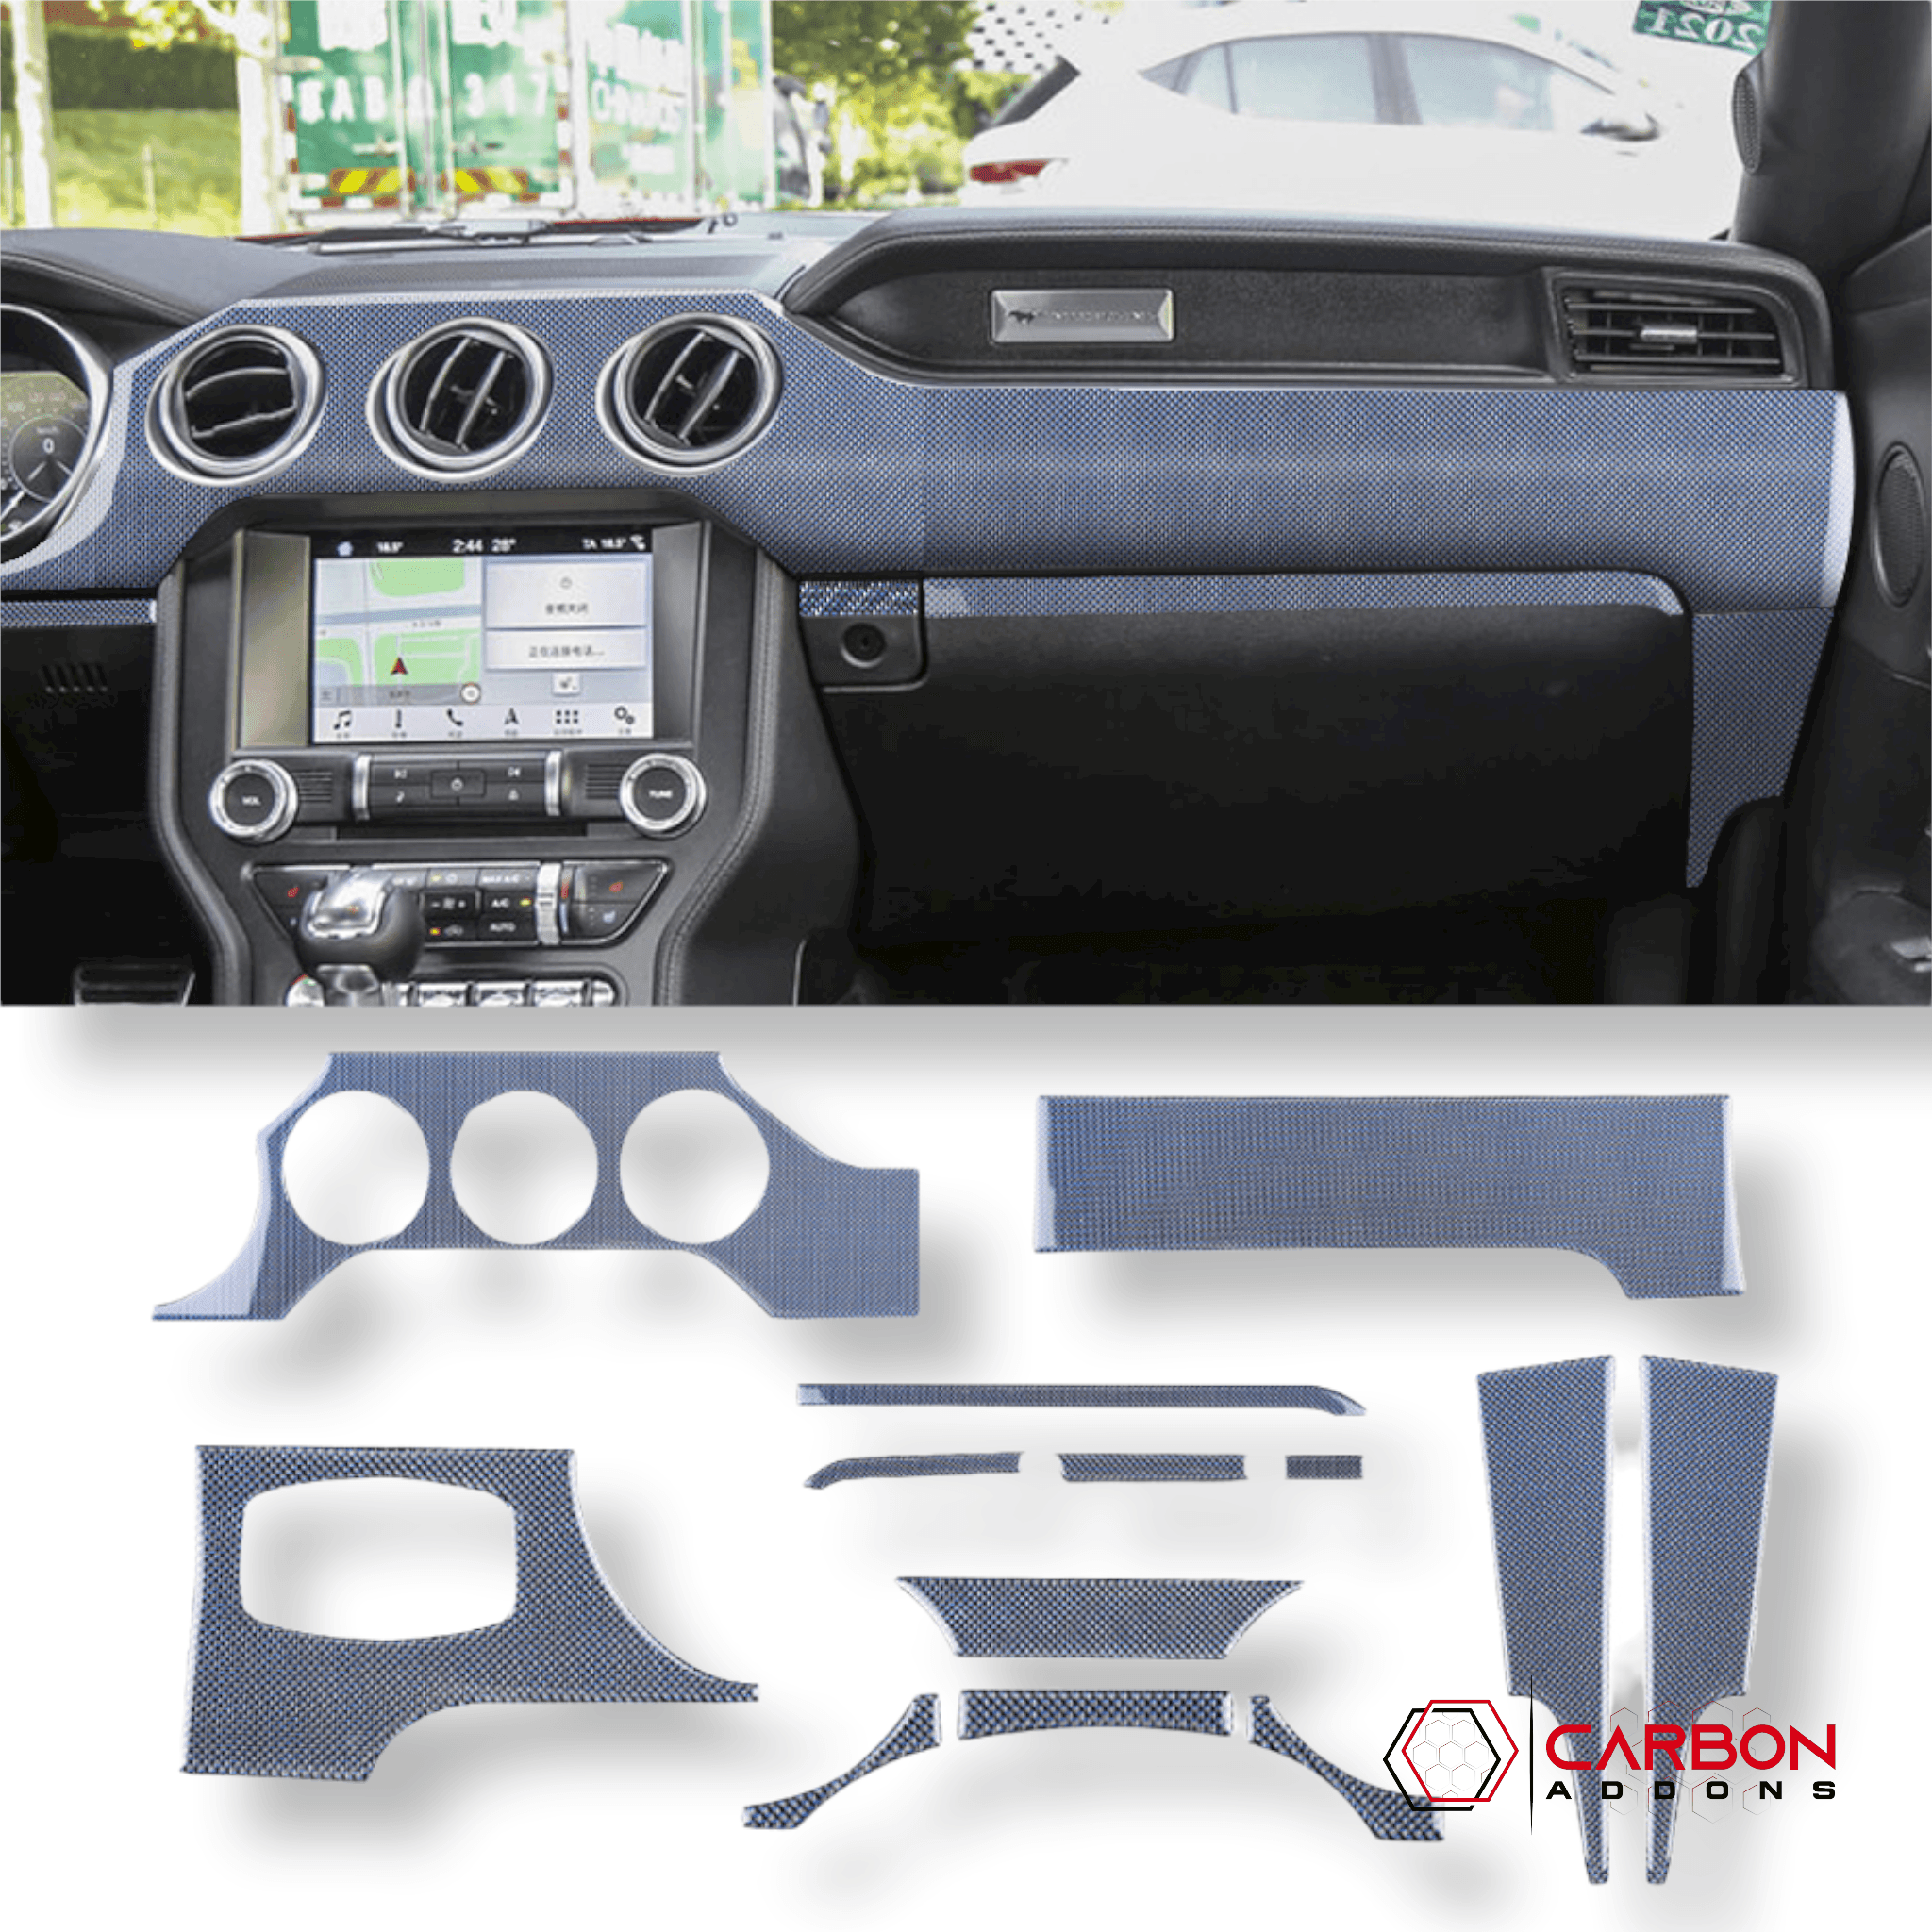 Reflective Carbon Fiber Full Dashboard Set for Ford Mustang 2015-2023 - carbonaddons Carbon Fiber Parts, Accessories, Upgrades, Mods